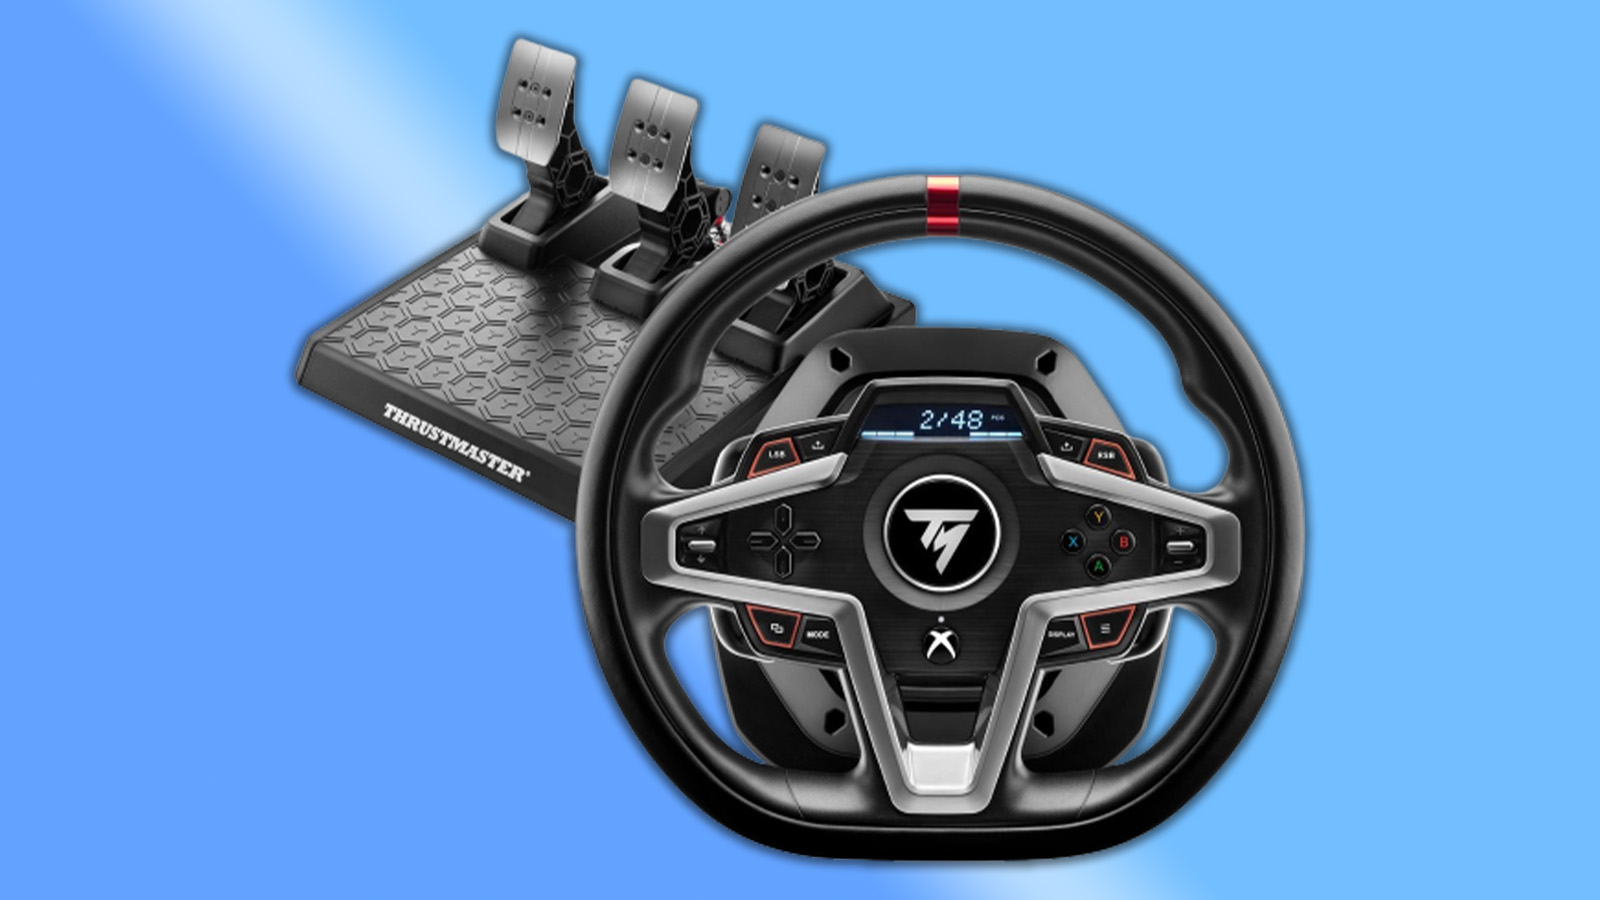 Thrustmaster T248, Magnetic Paddle Shifters, Dynamic Force Feedback, Racing  Information Screen - Racing Wheel & Magnetic Pedals for sale online